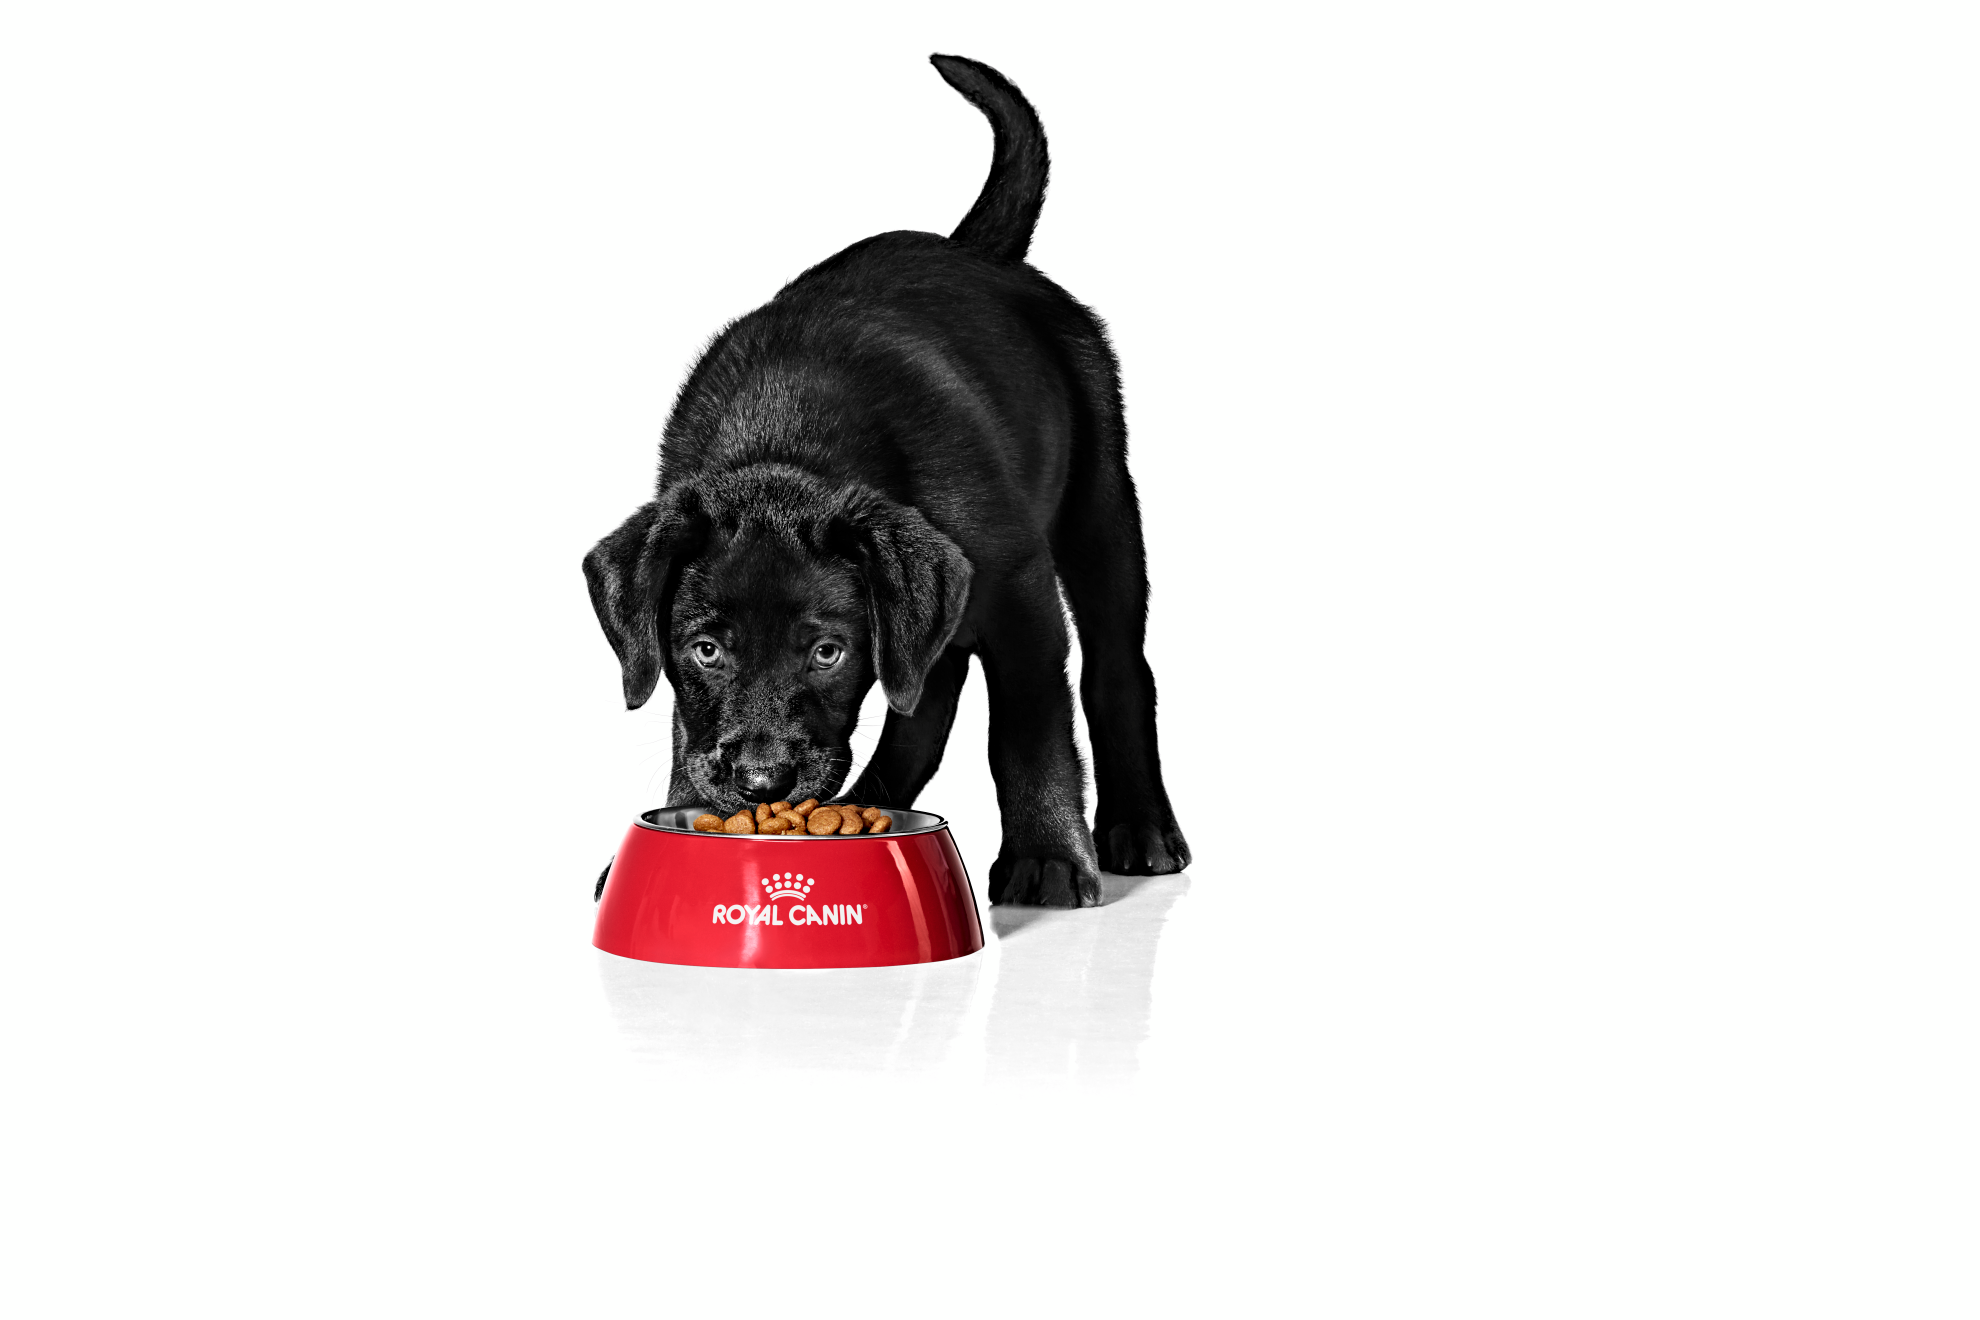 Labrador puppy black and white eating from red bowl